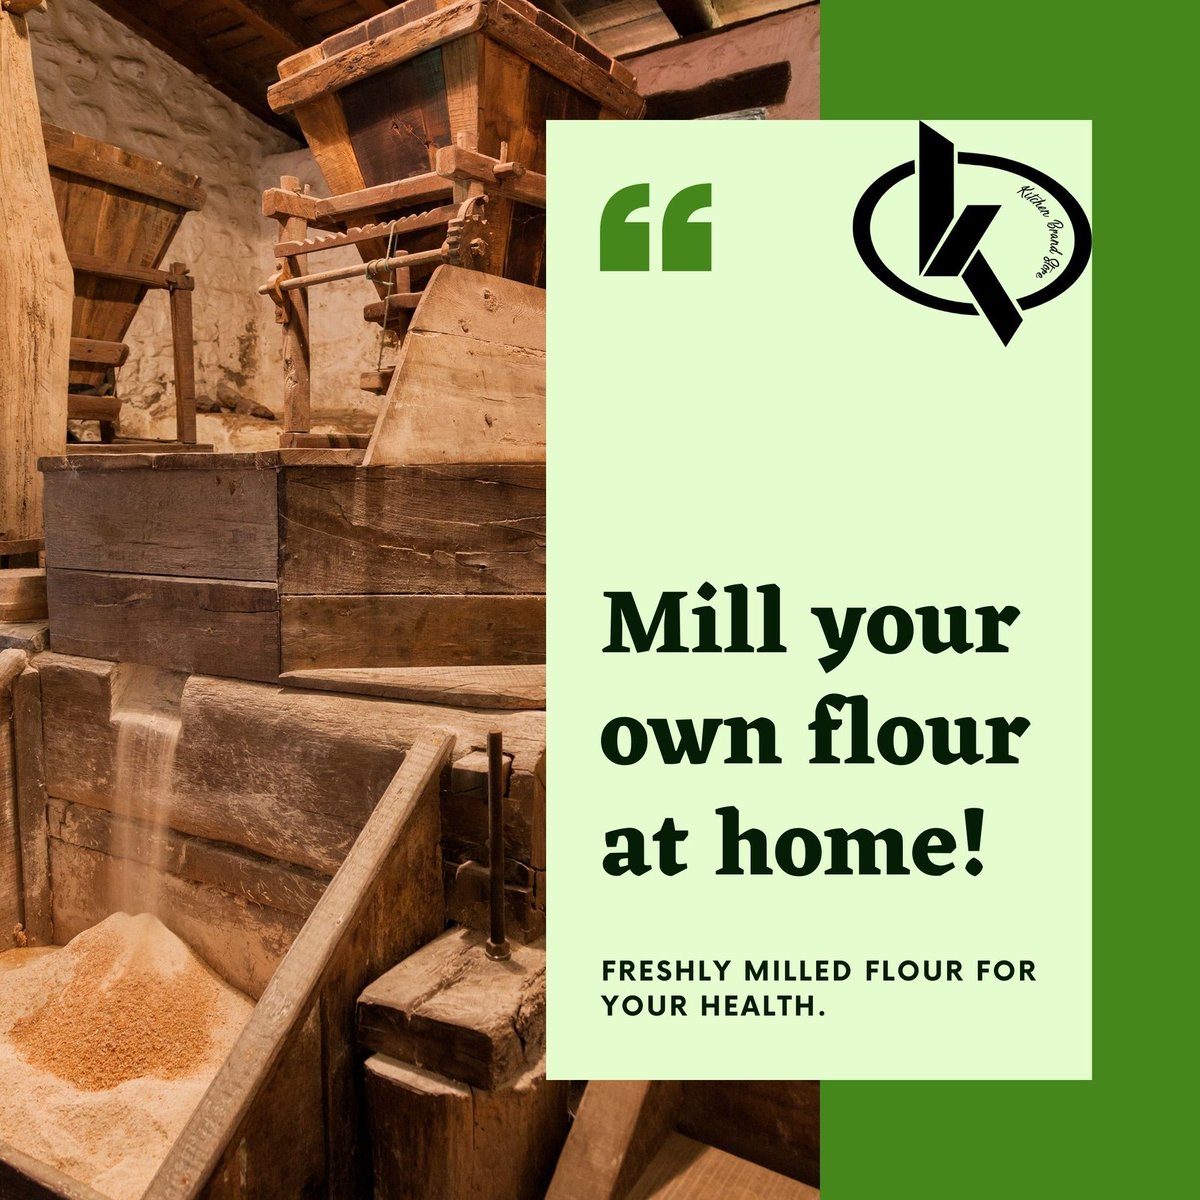 Owning a Flour Mill: Advantages, Options, and Considerations

In the past, people in India relied on a few flour mills in their area to grind their grains. They would bring their bags of grain and return with sacks of flour. #flourmill #graingrinding

kb.kitchenbrandstore.com/why-own-a-mill/